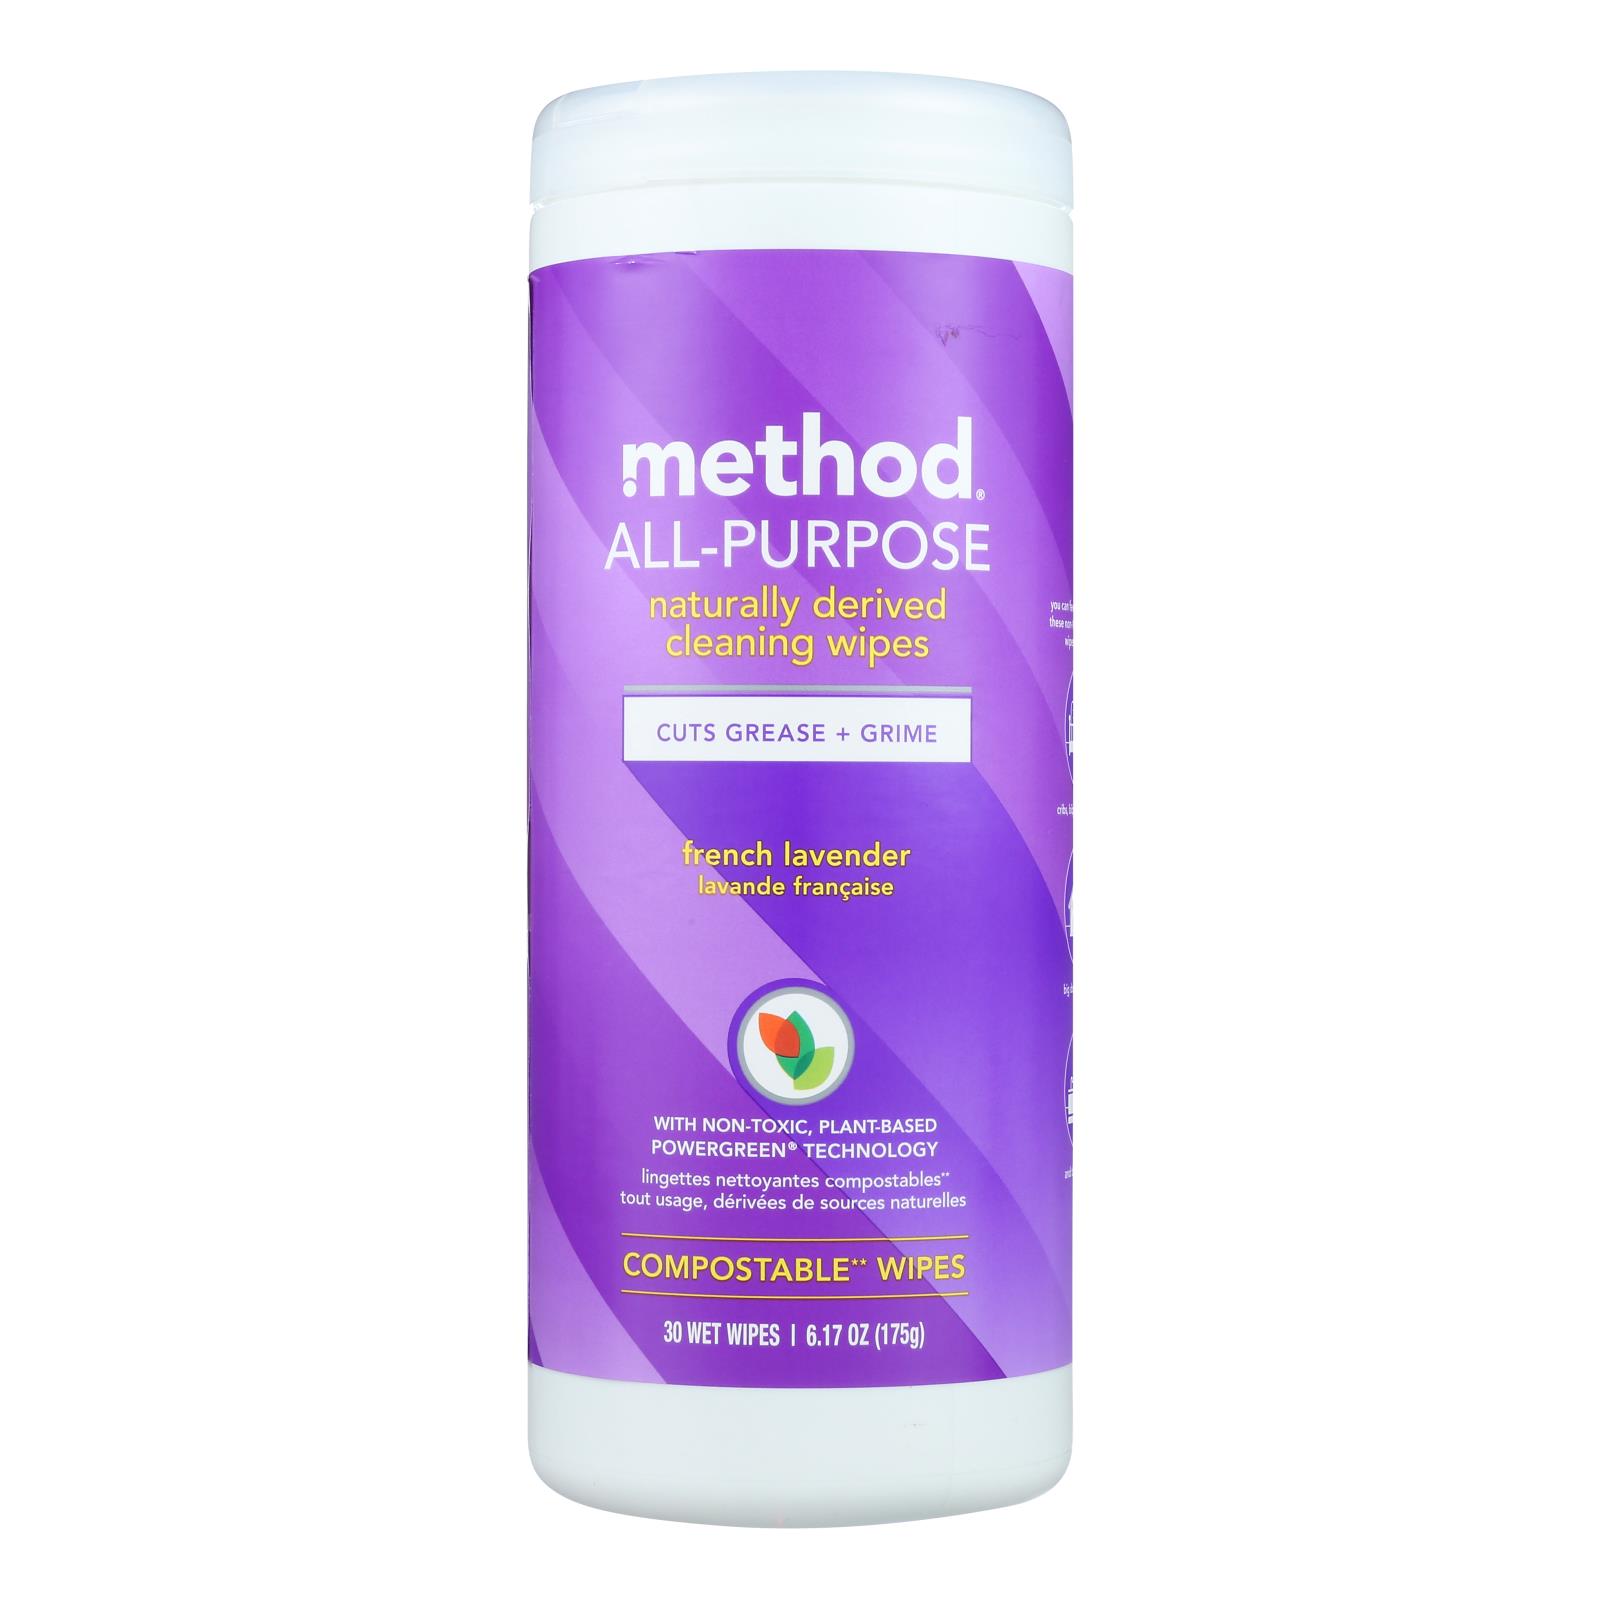 Method Products Inc - Wipes Ap French Lavender - Case of 6 - 30 CT